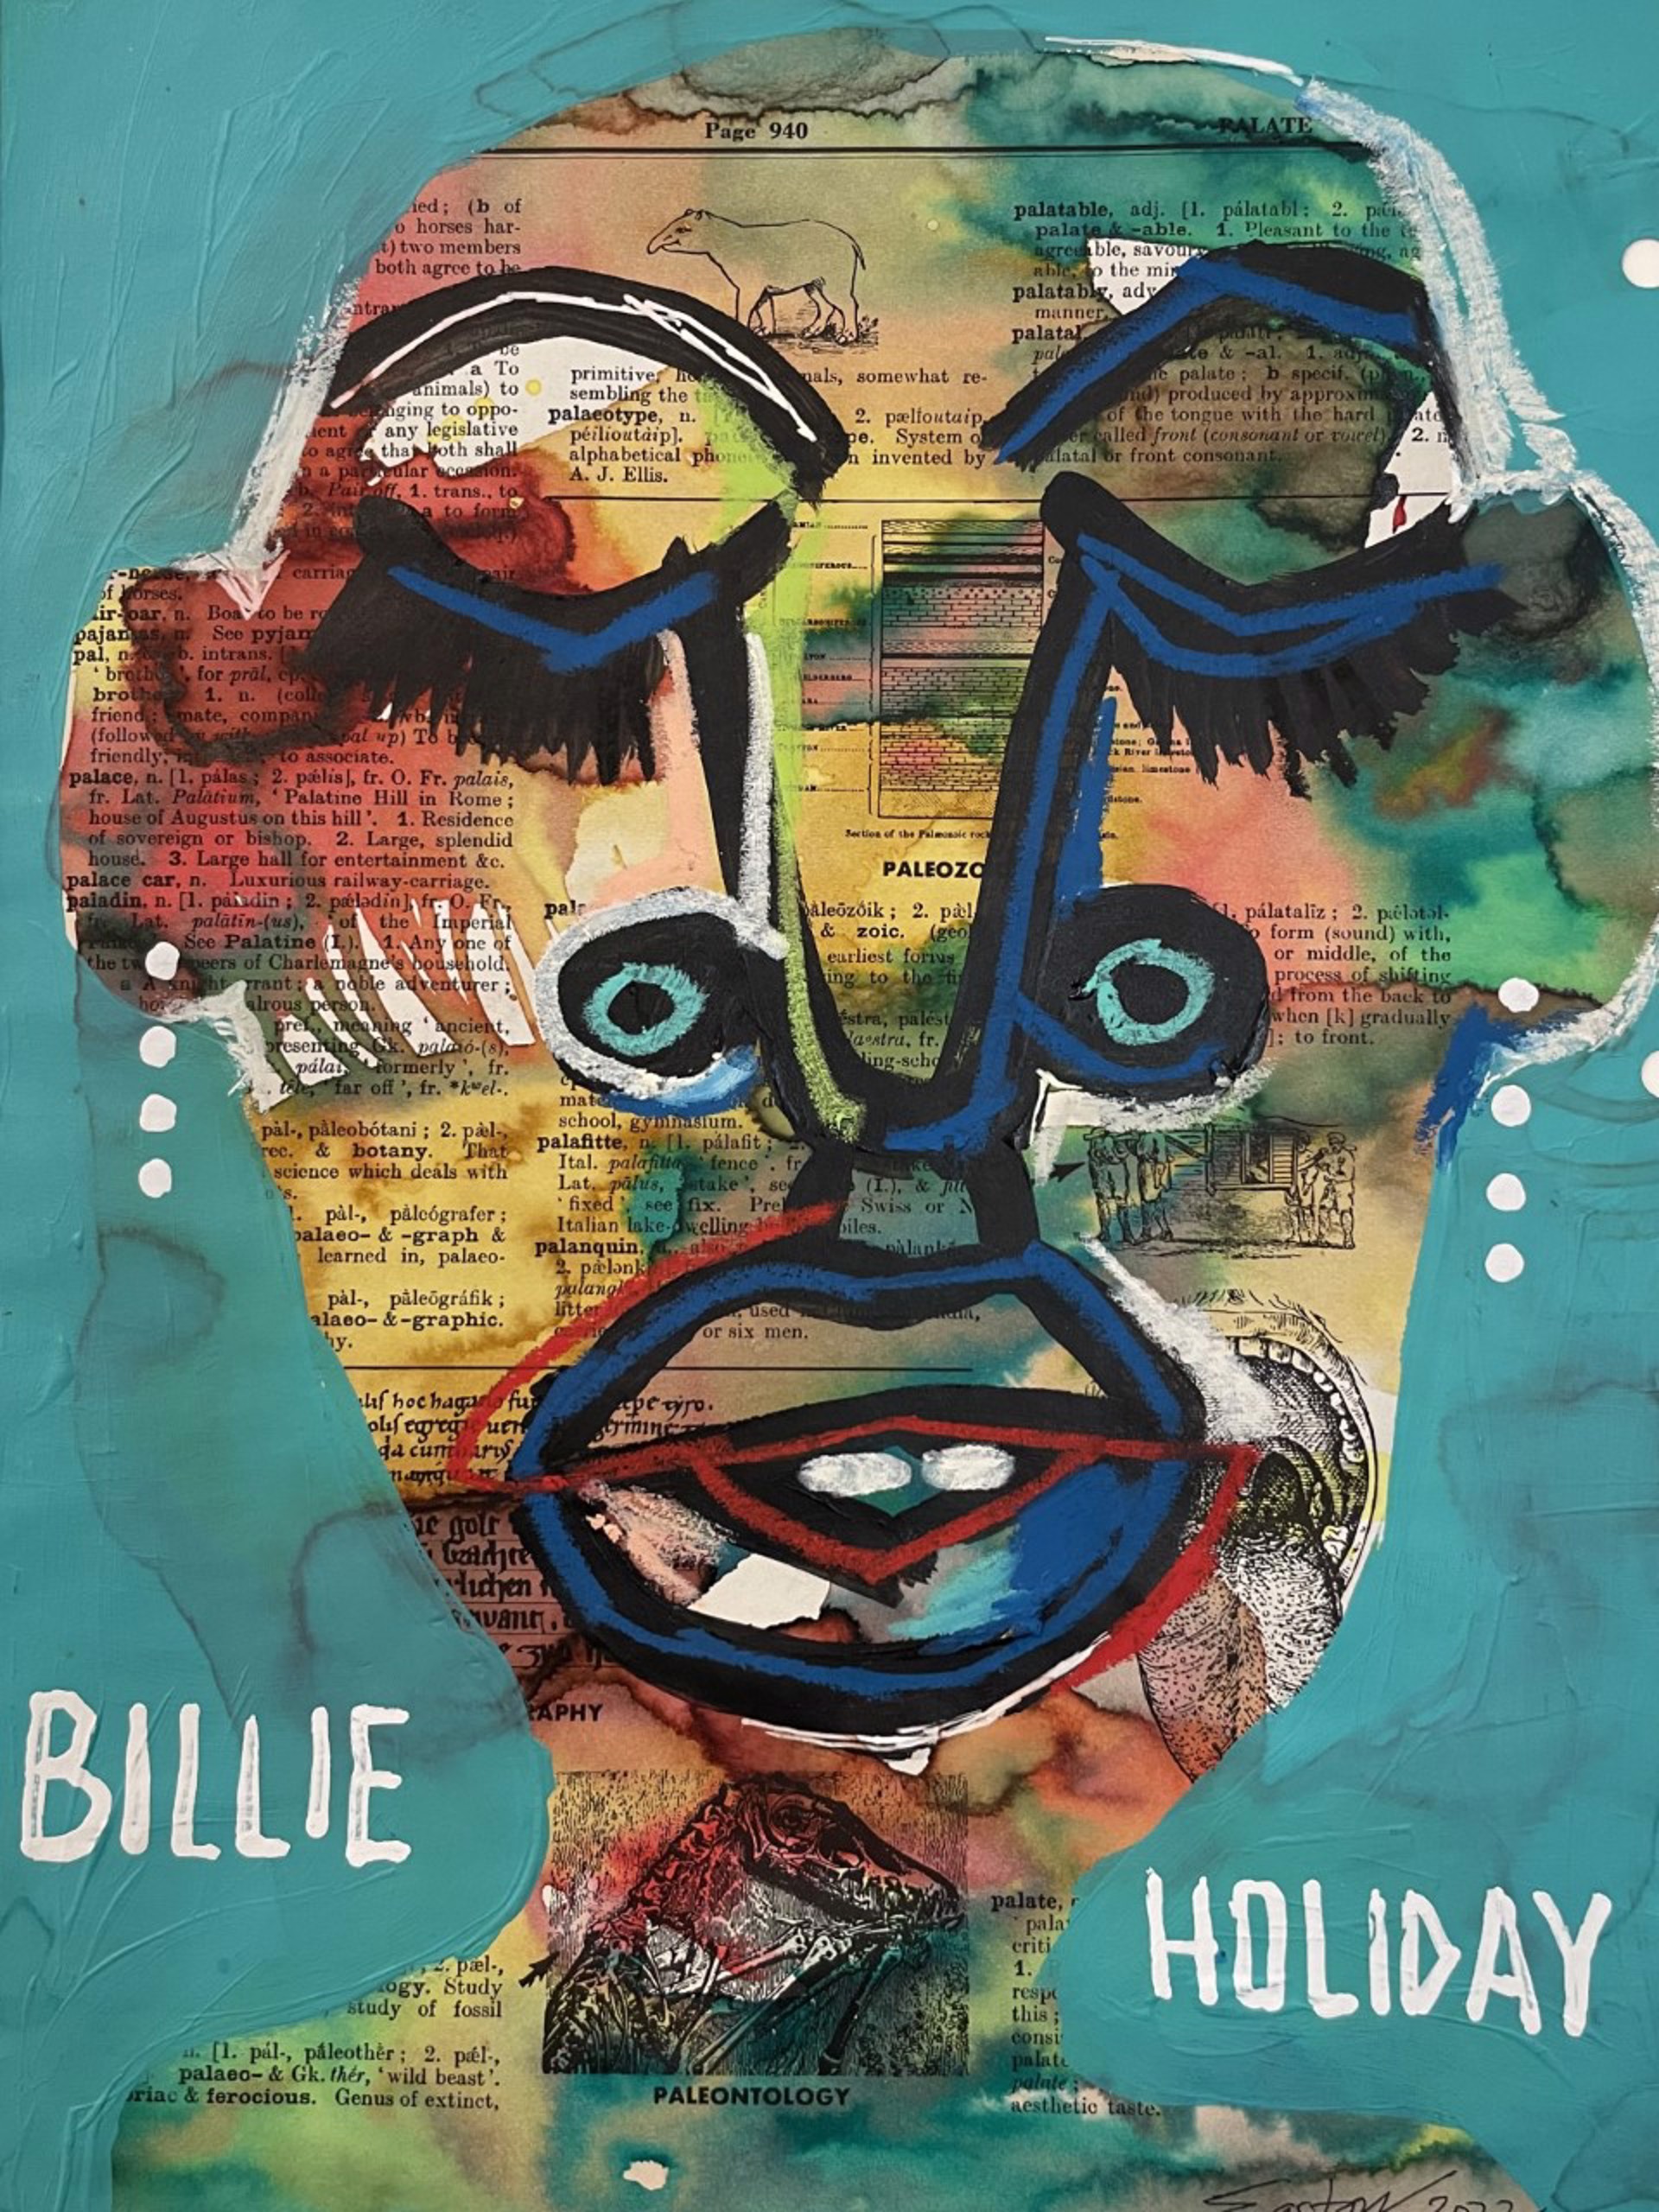 "Billie Holidy" by Easton Davy